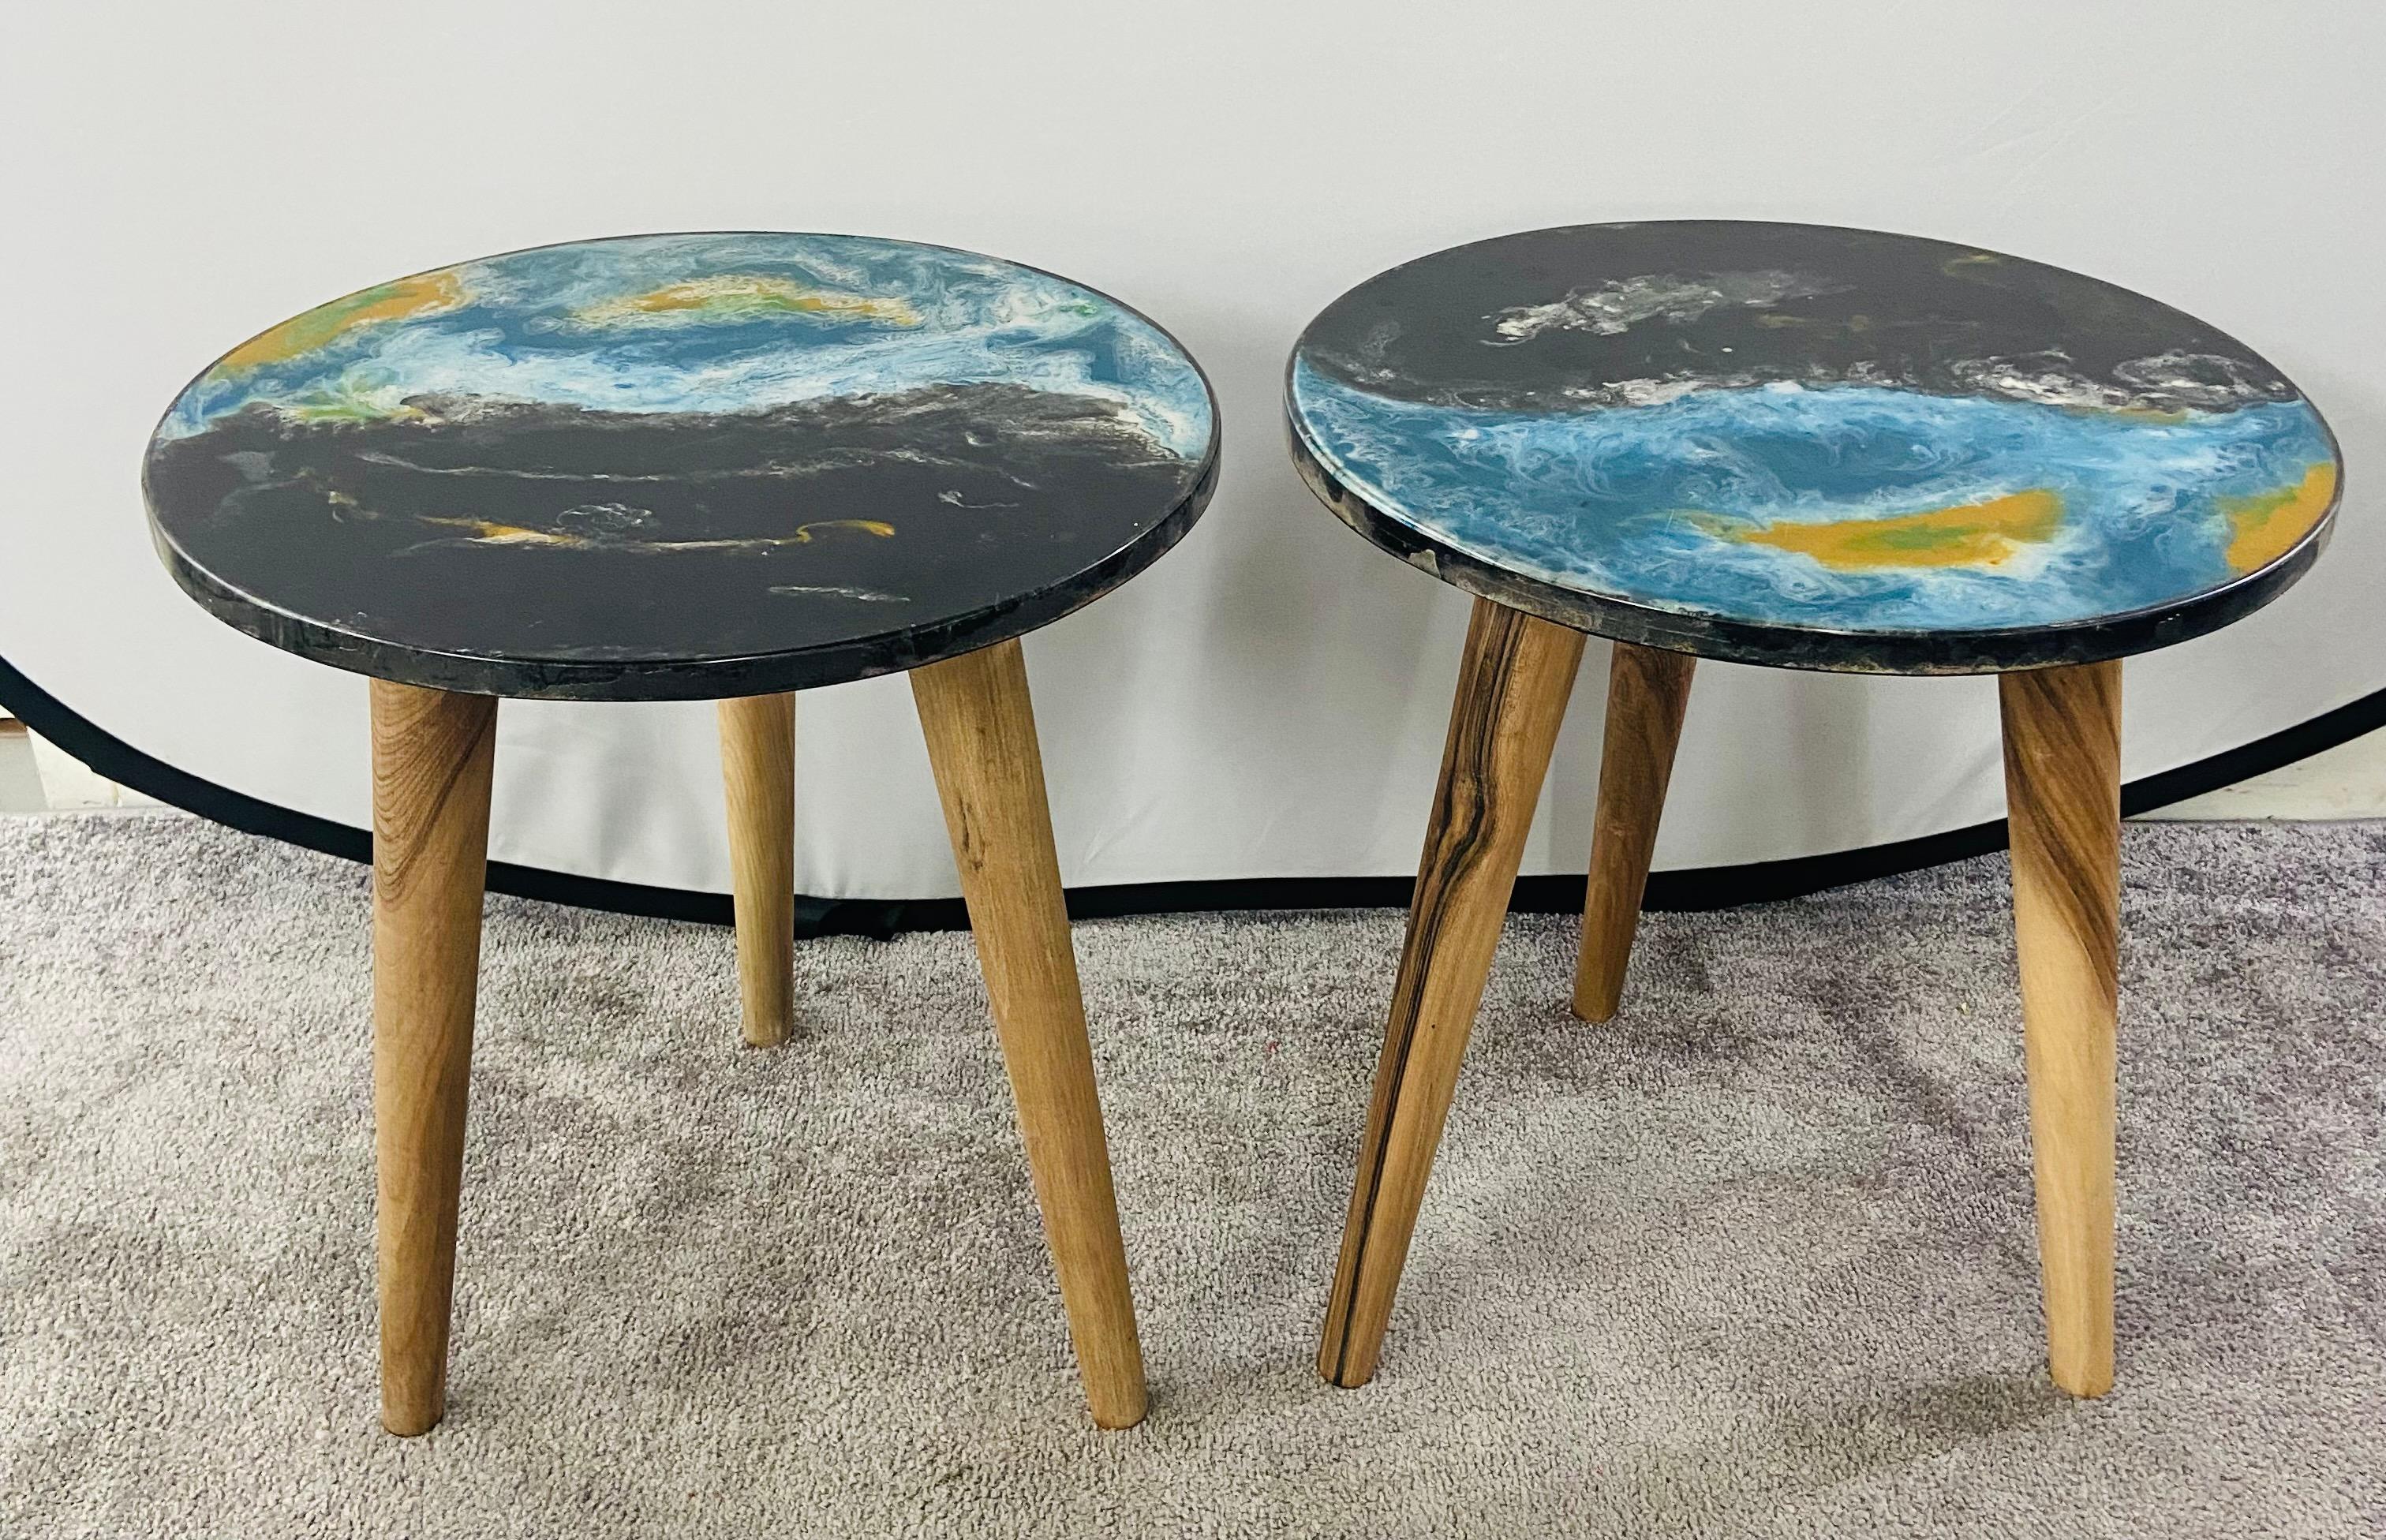 A Mid-Century Modern style pair of round top Resin Epoxy abstract design en or side table. The one of kind table top features back and blue with hint of yellow colors over three splayed pig legs made of walnut. The beautiful wood grain natural